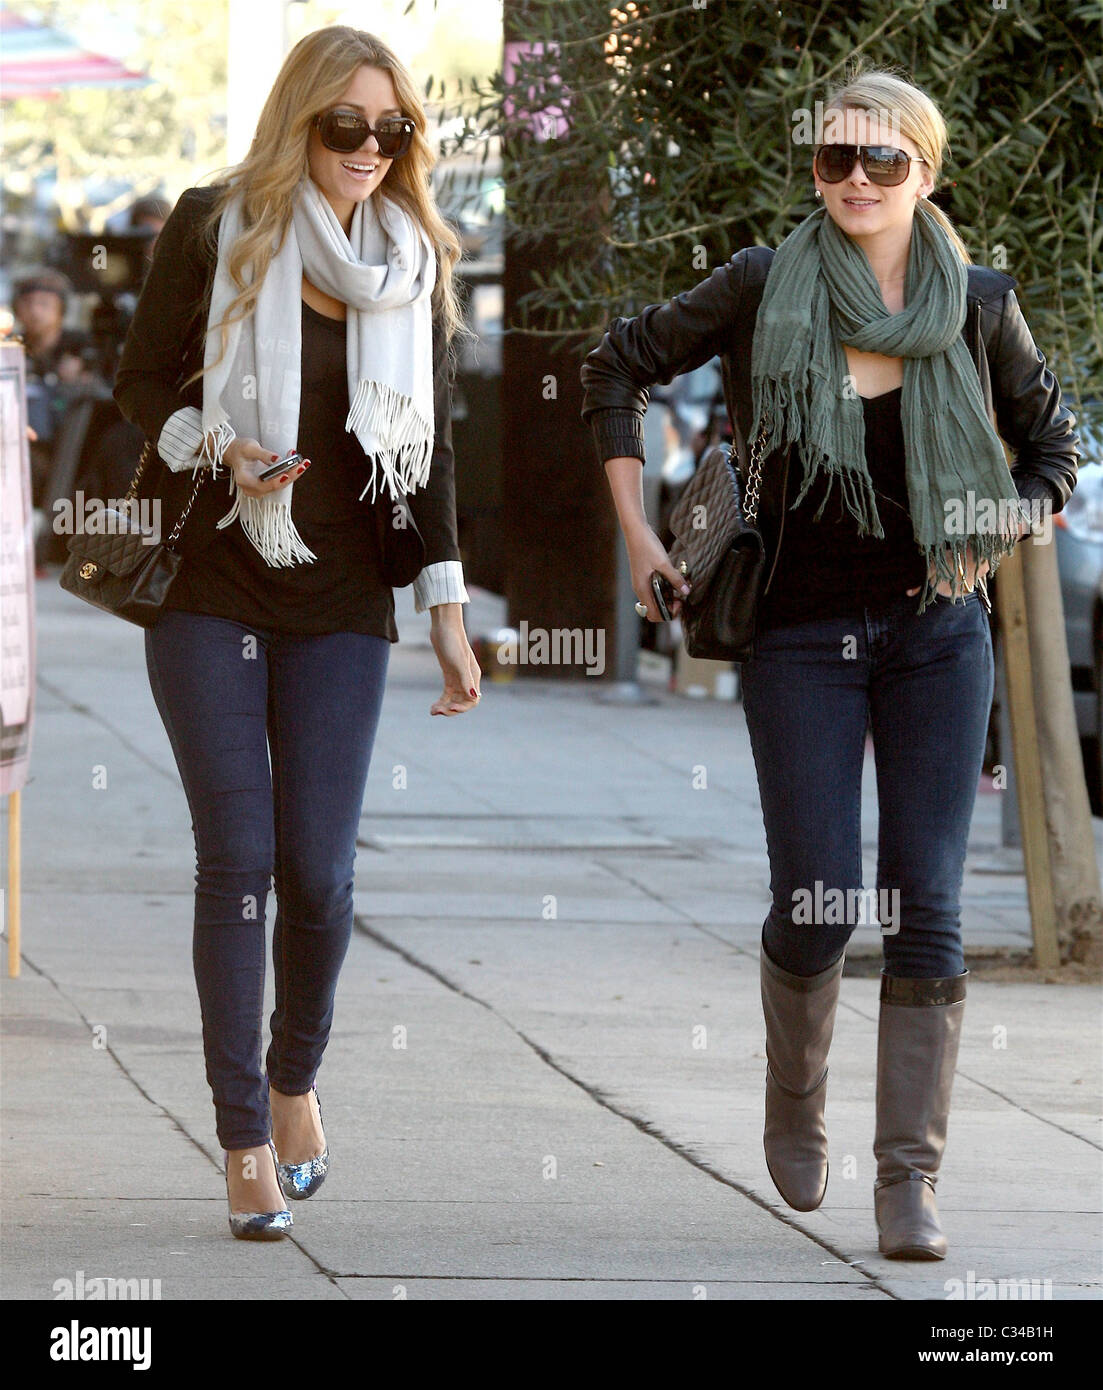 https://c8.alamy.com/comp/C34B1H/lauren-conrad-and-lo-bosworth-were-spotted-filming-the-hills-at-mirale-C34B1H.jpg